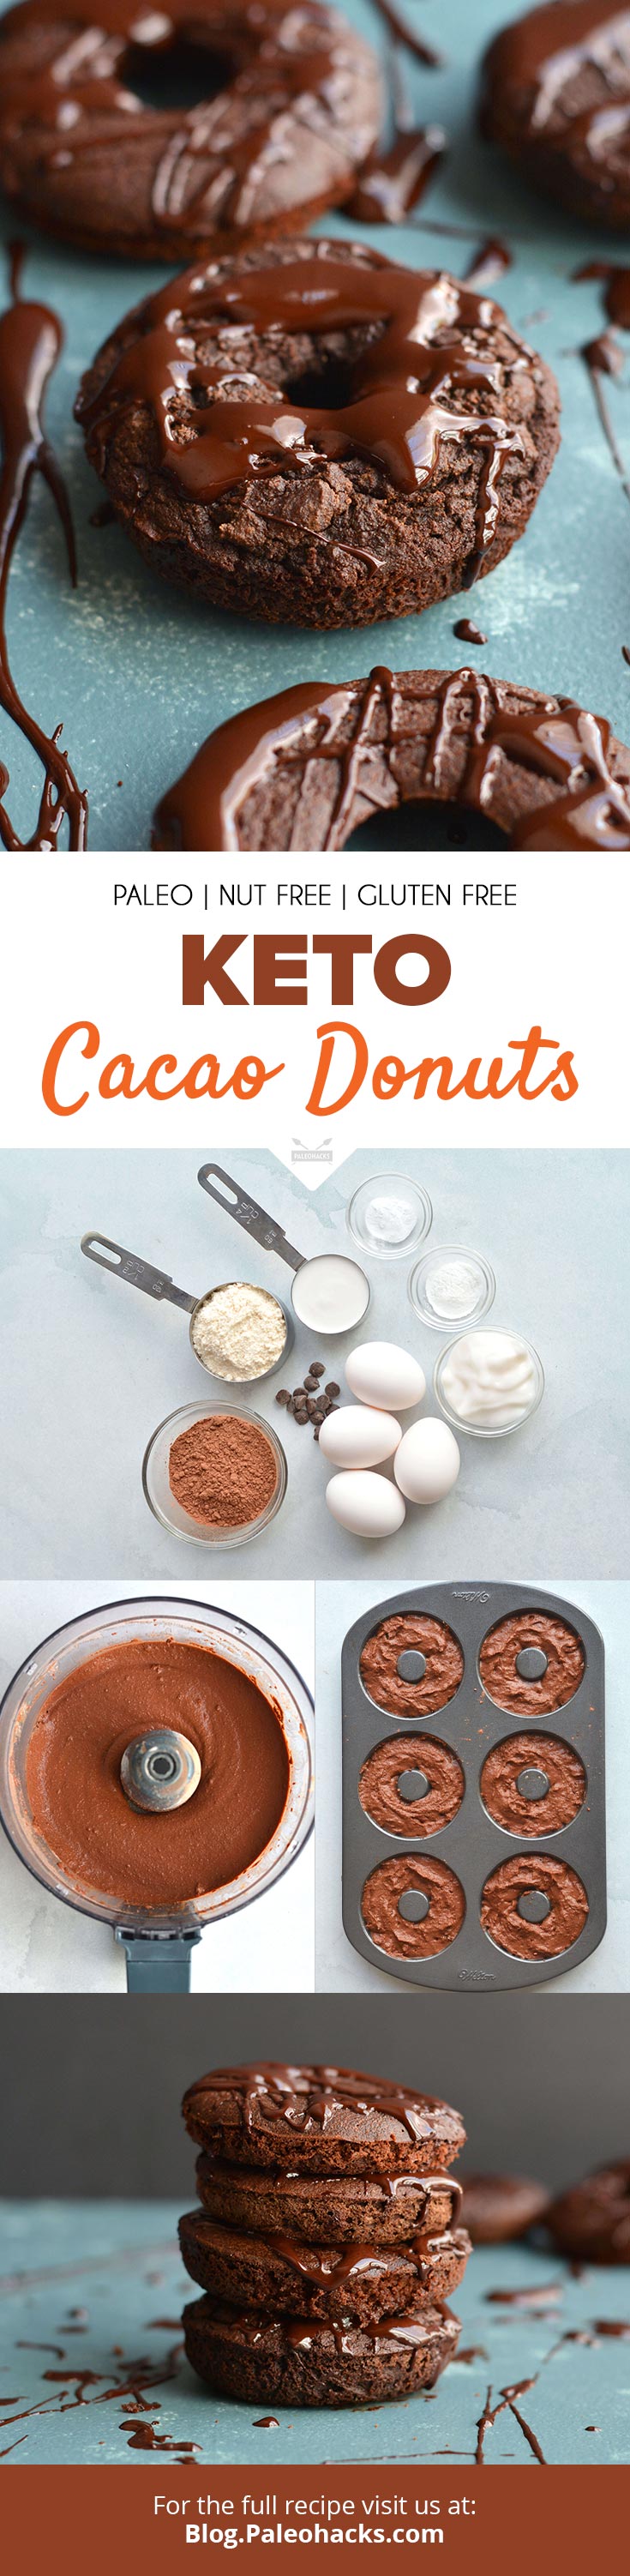 Satisfy your morning chocolate cravings with these uber-rich Keto Cacao Donuts. Enjoy everything you love about chocolate donuts, now in keto form.